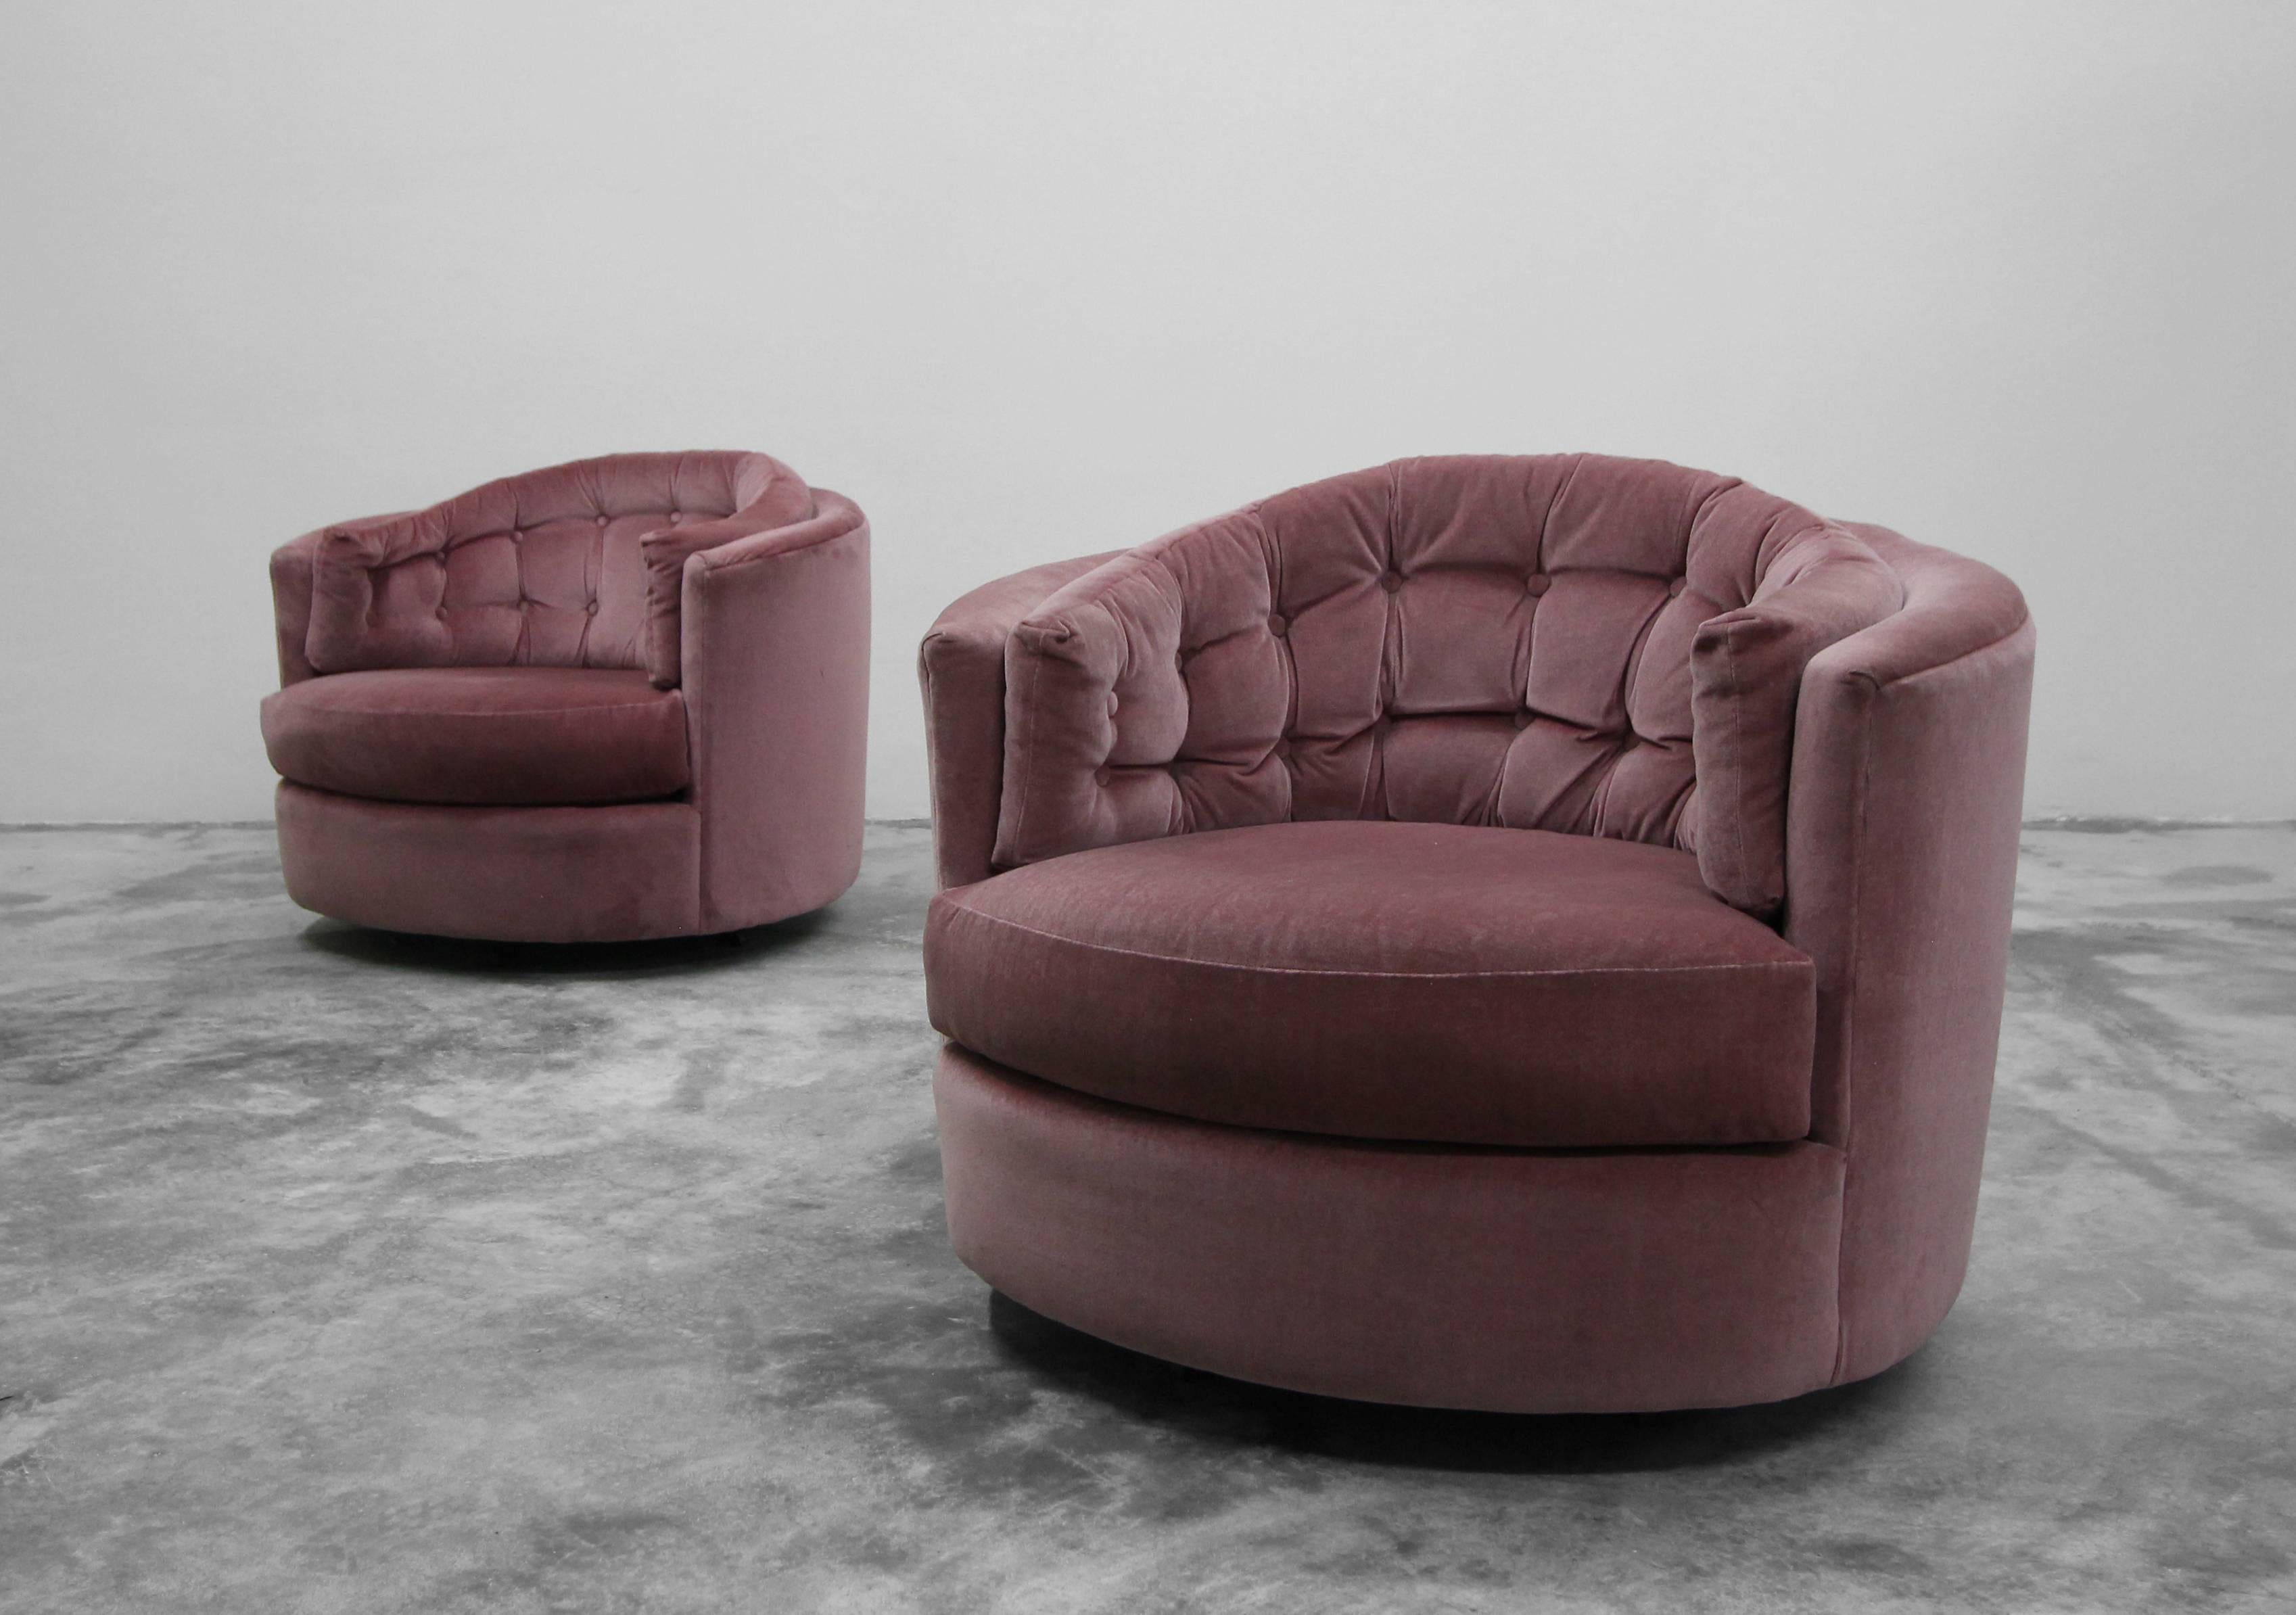 Nice pair of midcentury rocking swivel barrel chairs by Milo Baughman. Perfect pair. Beautiful mauve velvet fabric.

Chairs sold as found. Fabric is in good usable condition with no odors, rips tears or stains, minimal wear. Chairs swivel well.